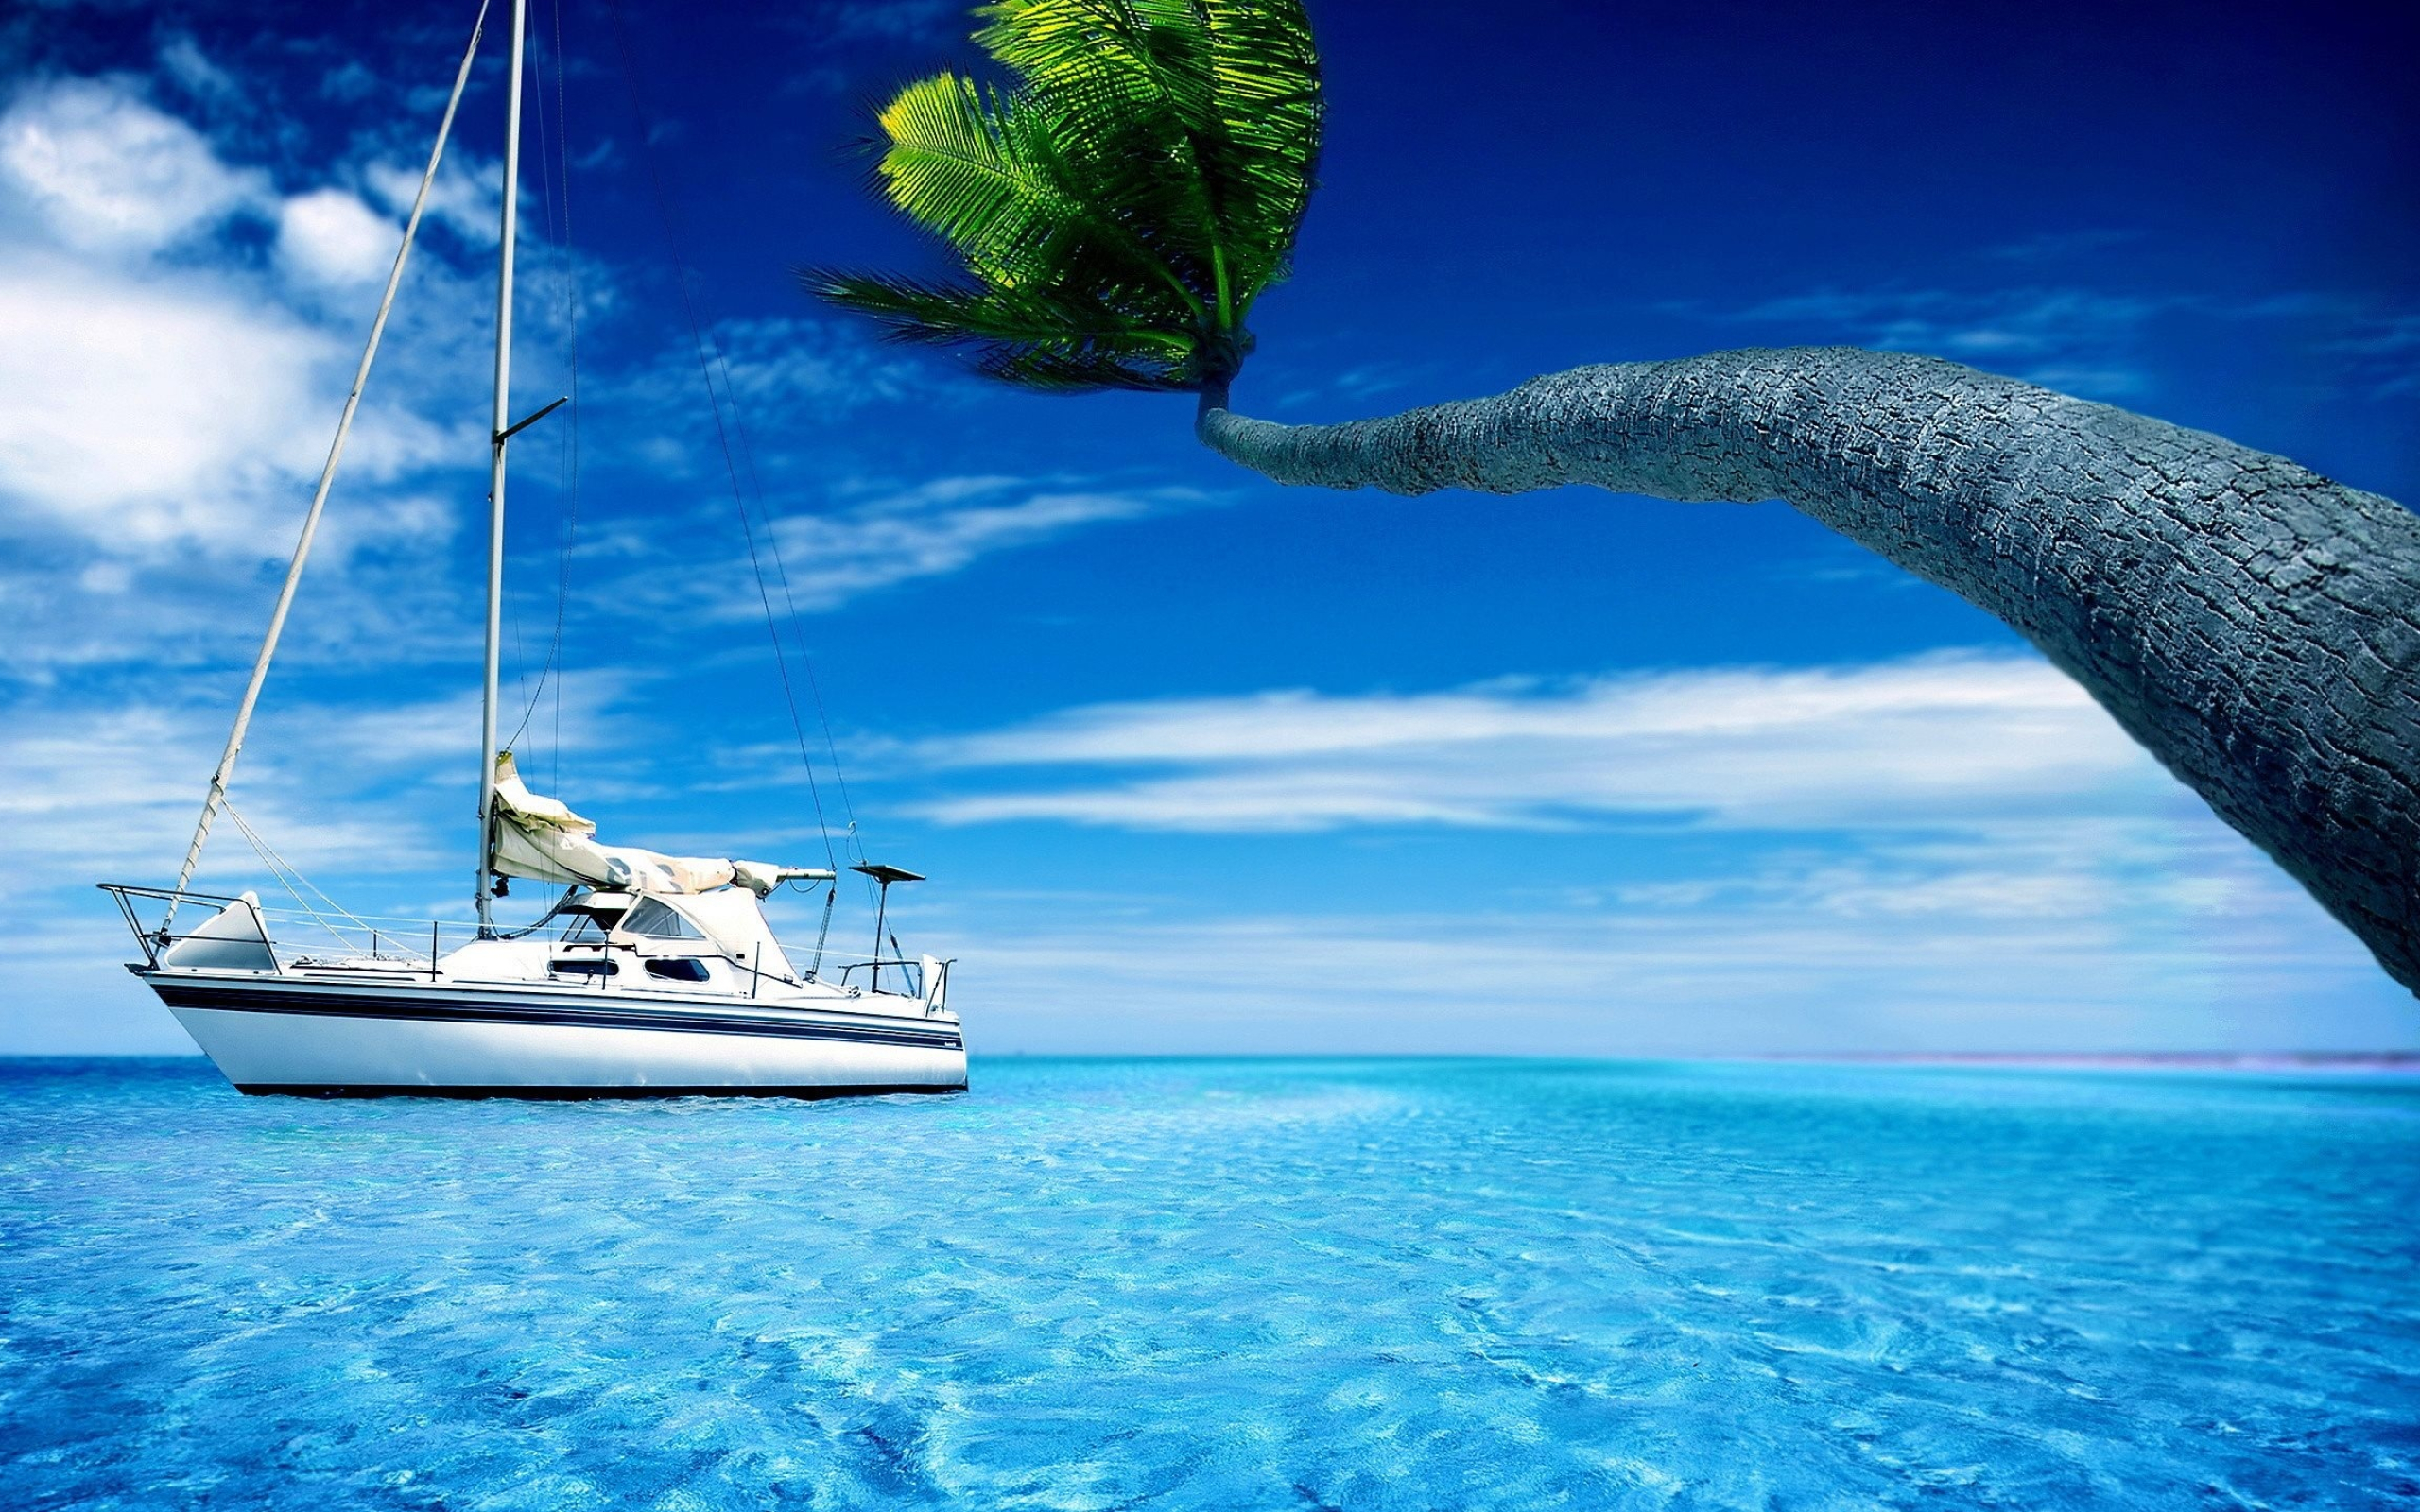 Sail Boat: A vessel propelled partly or entirely by sail, Blue-water cruising. 2560x1600 HD Wallpaper.